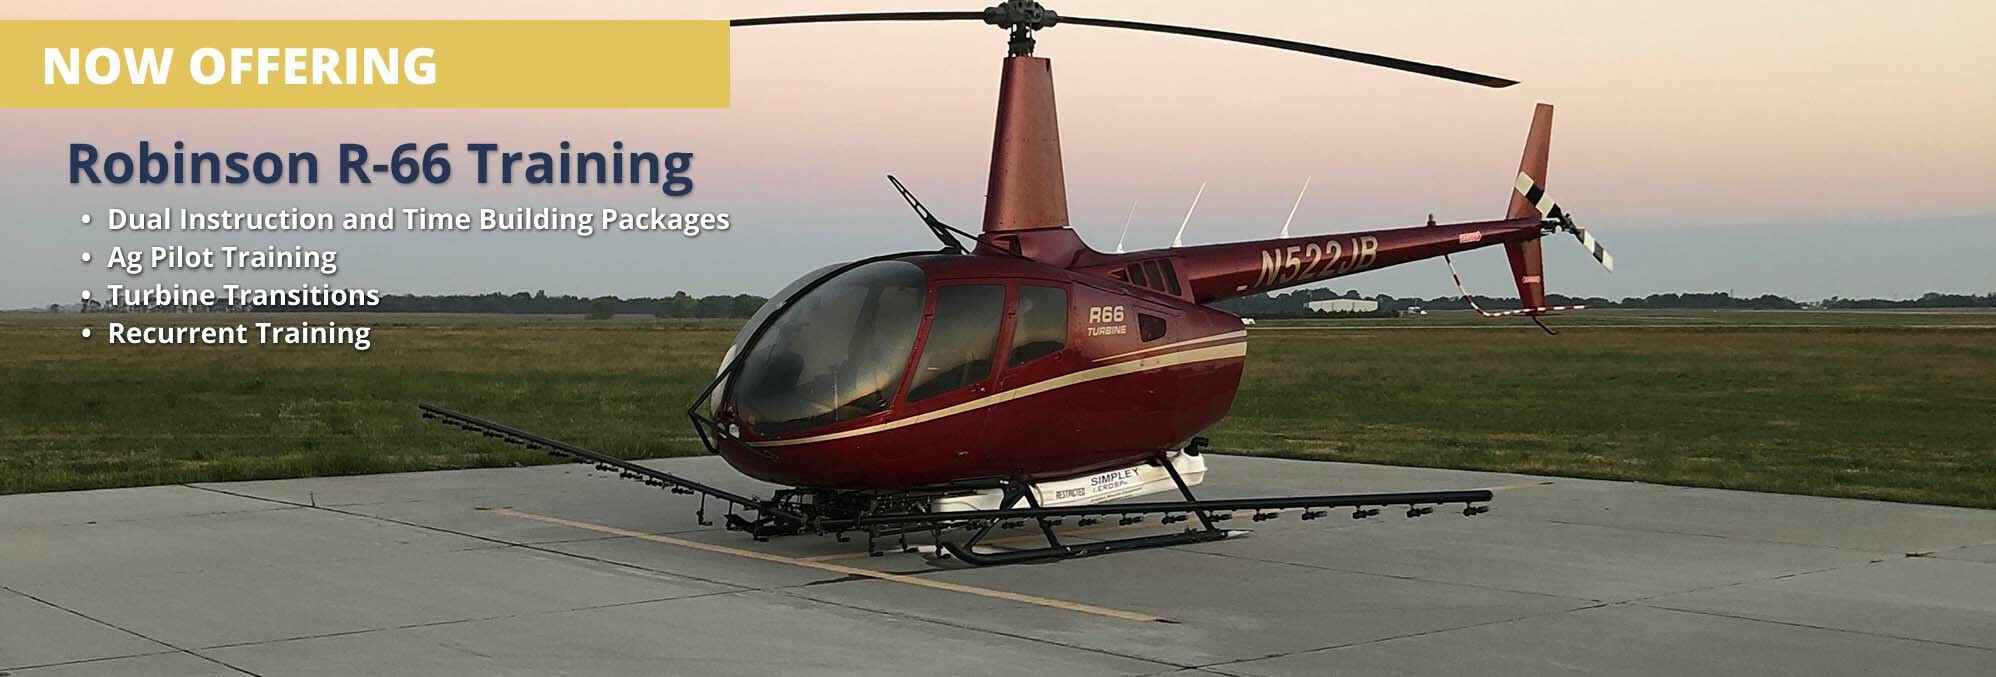 Now offering Robinson R-66 Training